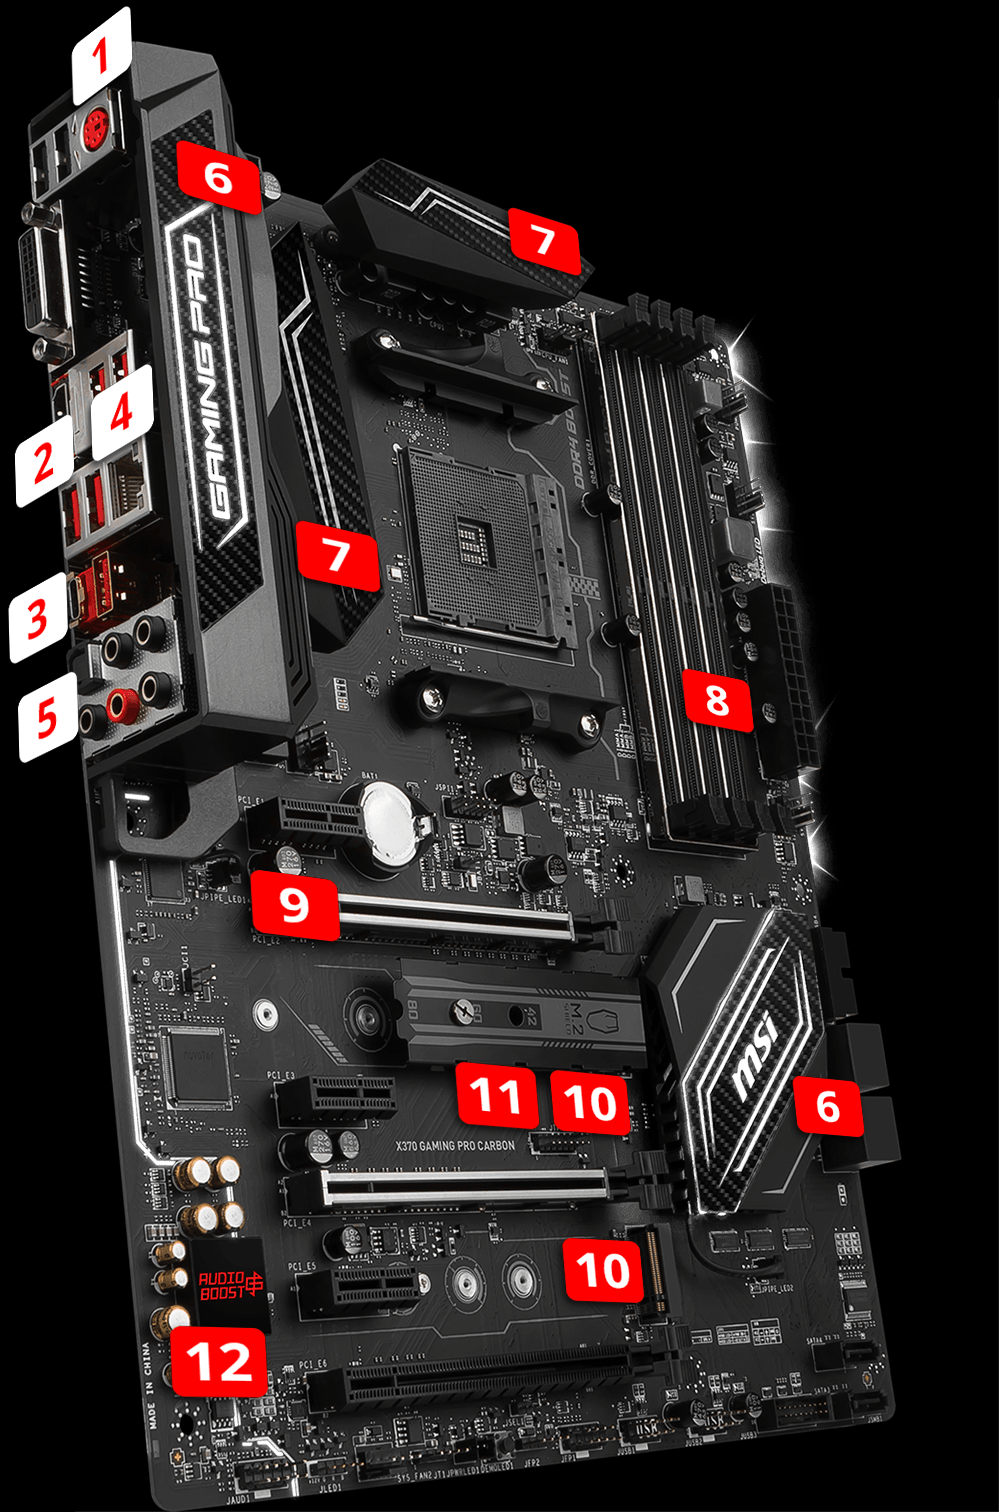 X370 GAMING PRO CARBON | Motherboard - The world leader in motherboard